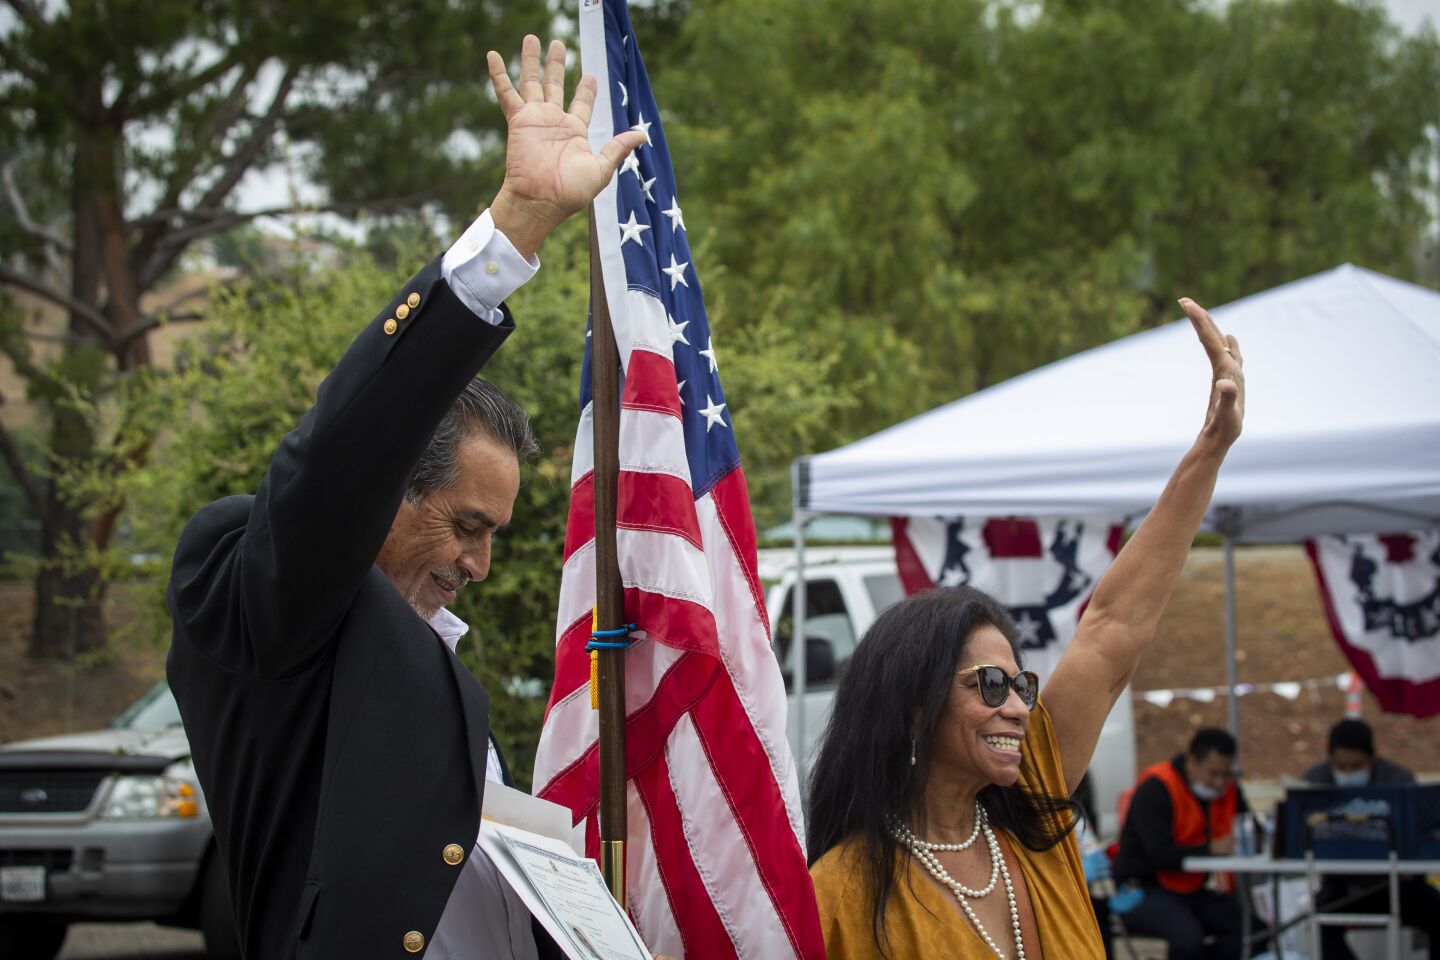 Suely Franciose, right, and her husband, Luis Cervantes, celebrate his new citizenship.